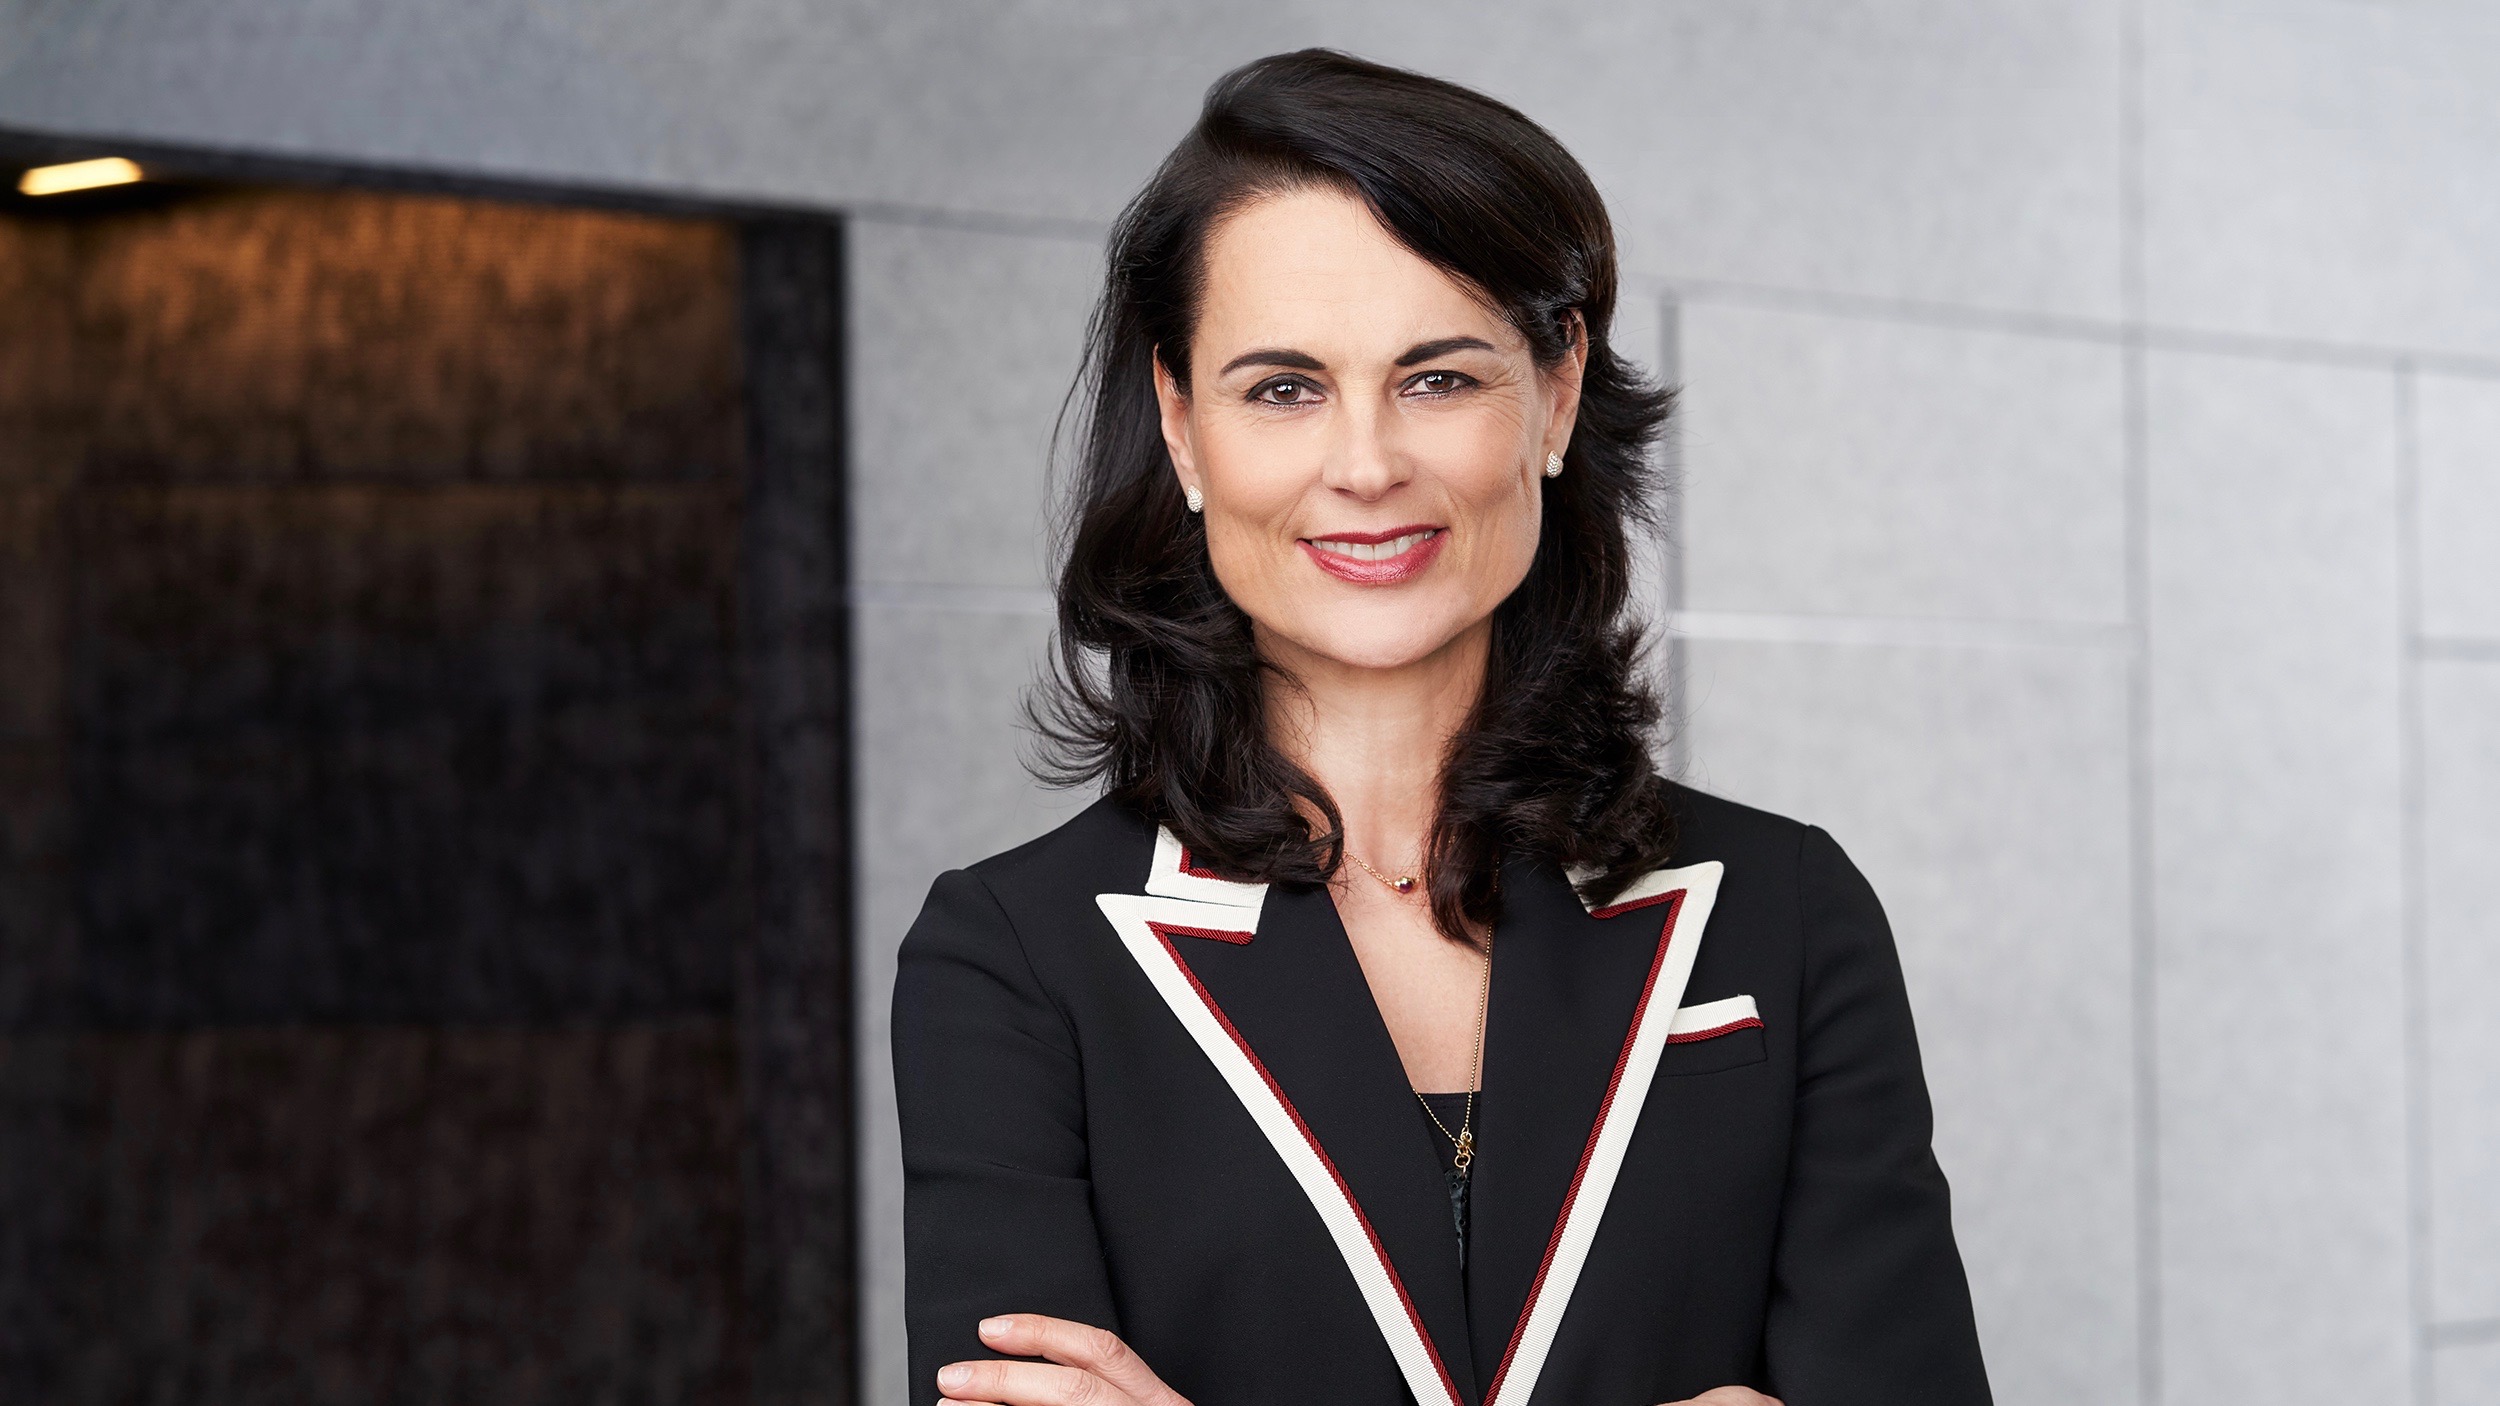 Natalie Mekelburger, President and CEO, Coroplast, 2020, Porsche Consulting